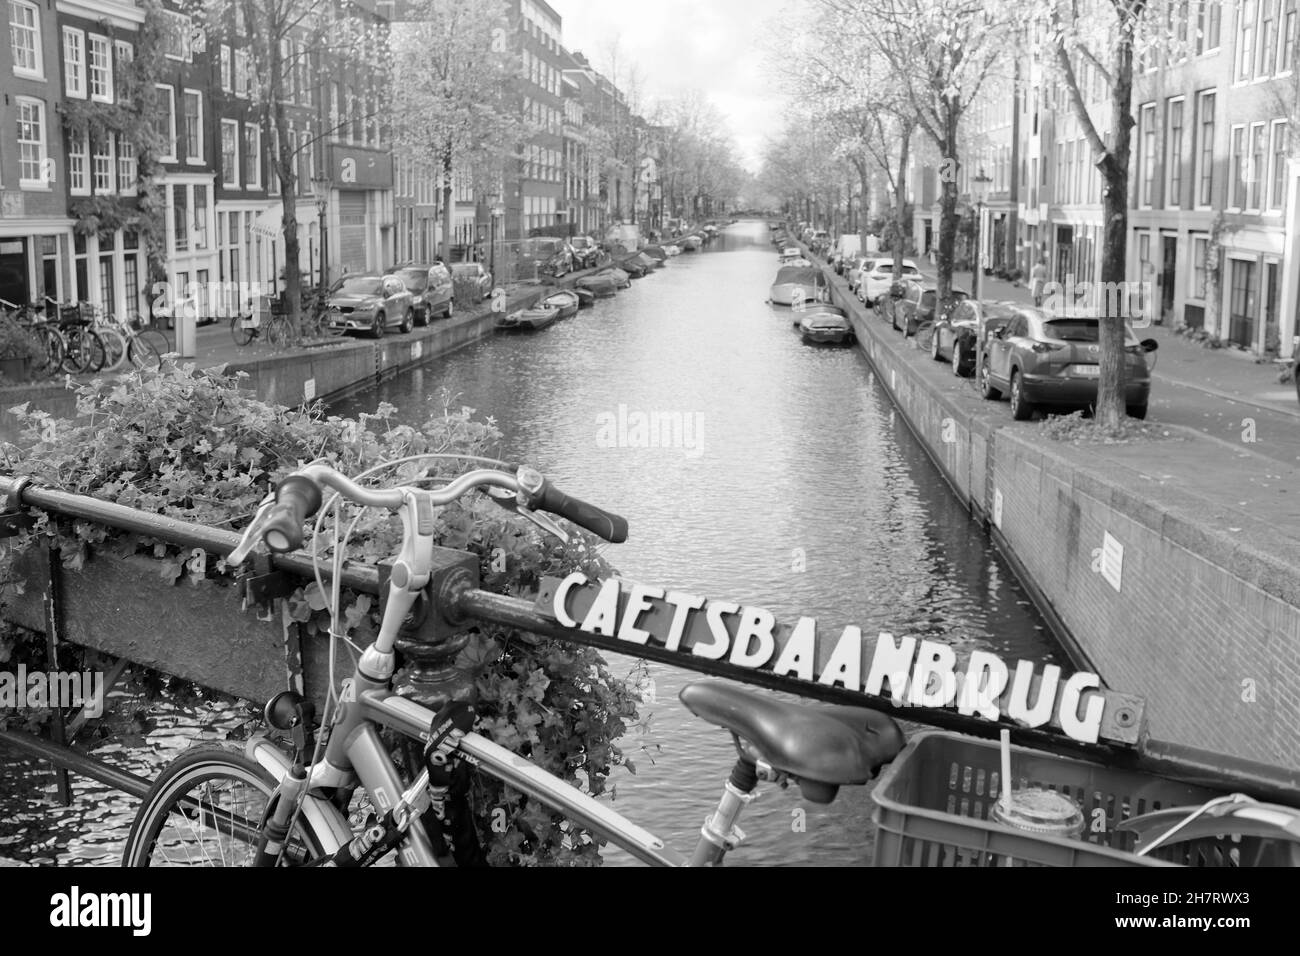 Canaux d'Amsterdam, Amsterdam, Pays-Bas. Banque D'Images